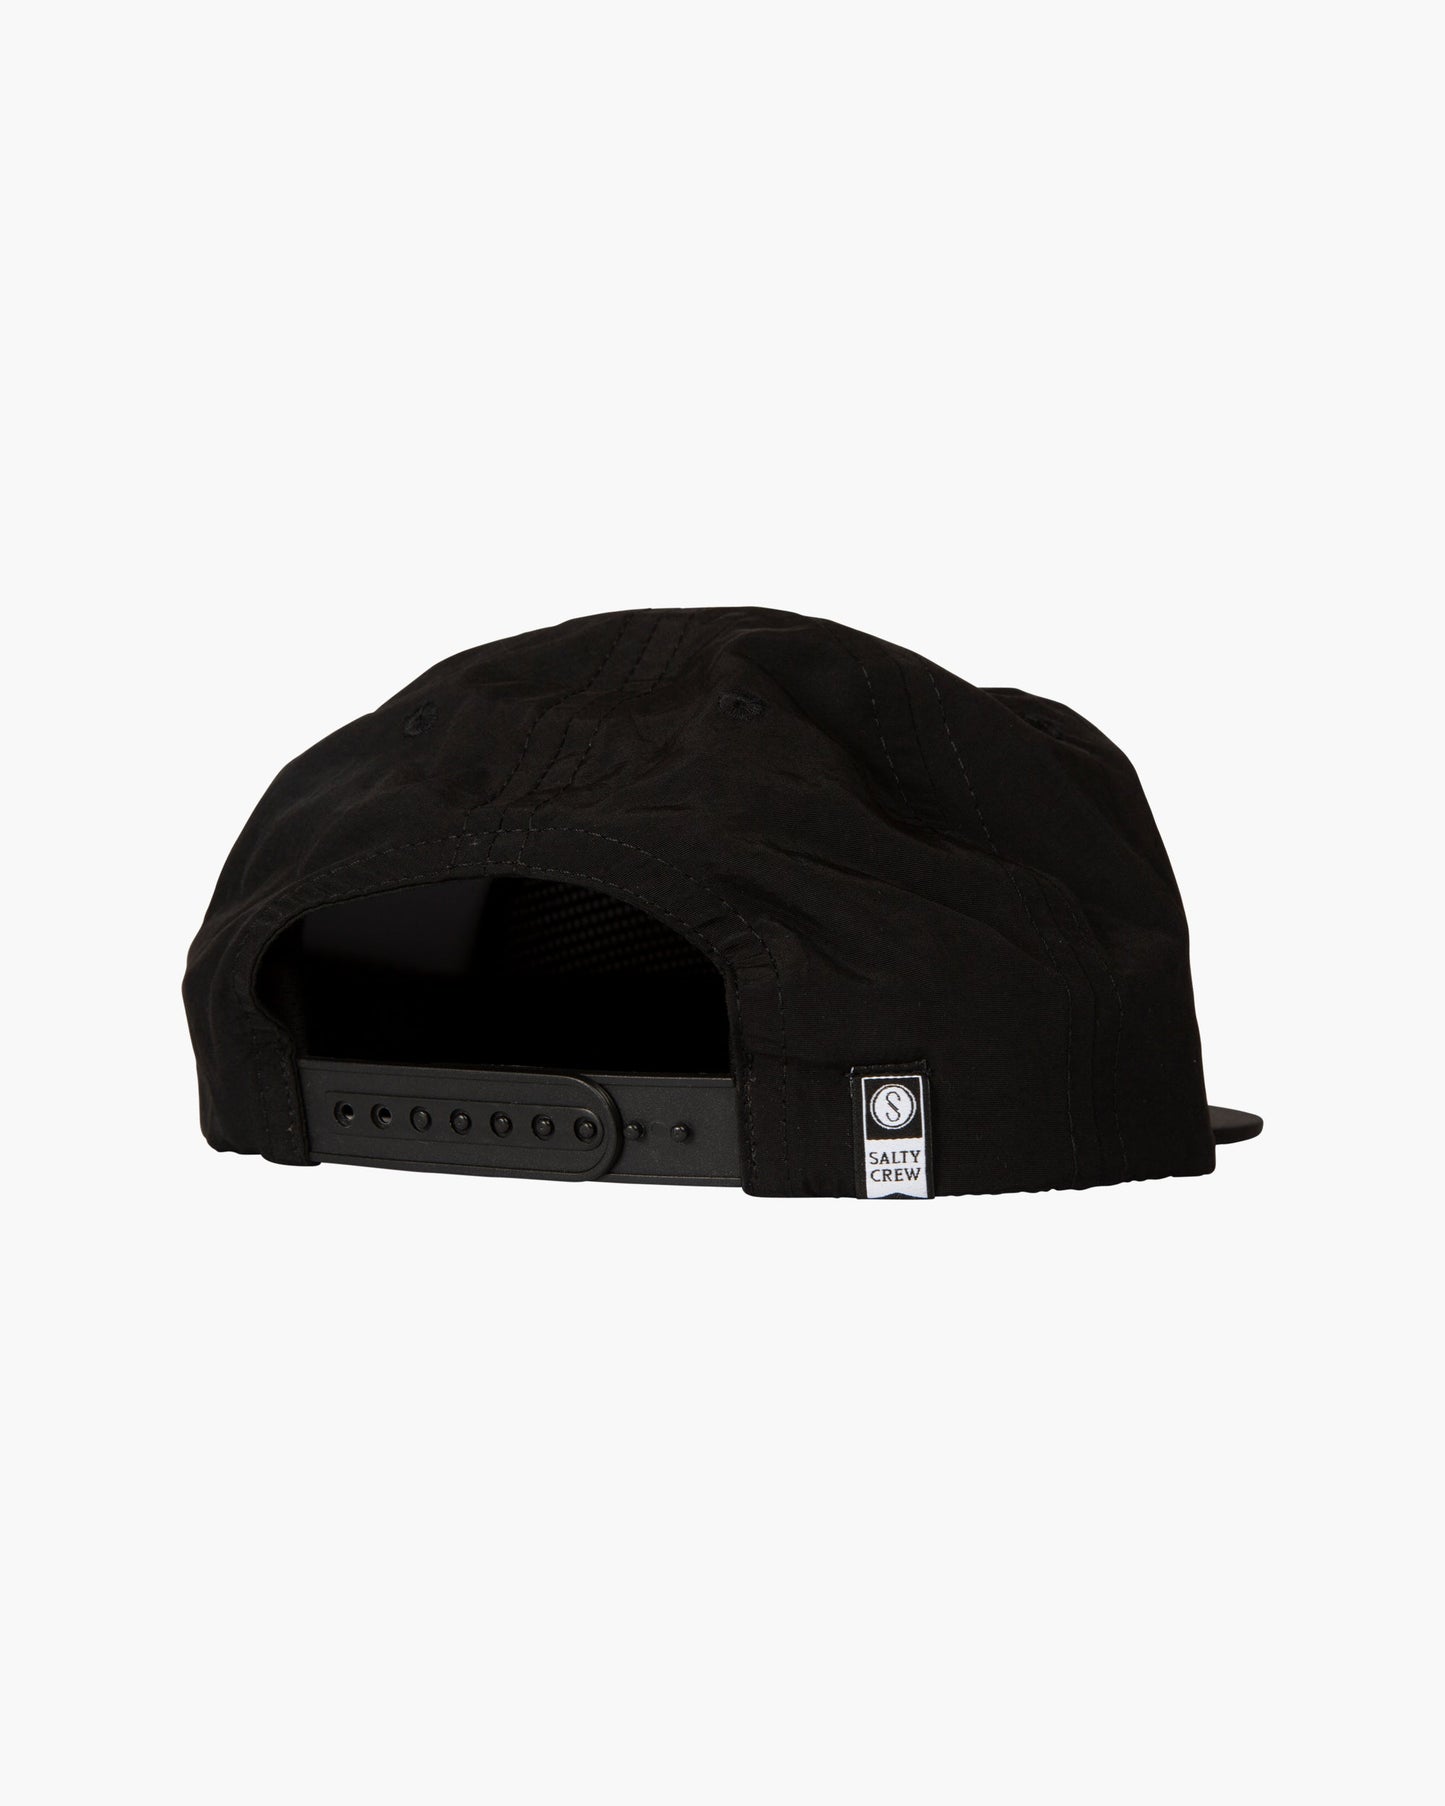 FIRST MATE 5 PANEL - Black